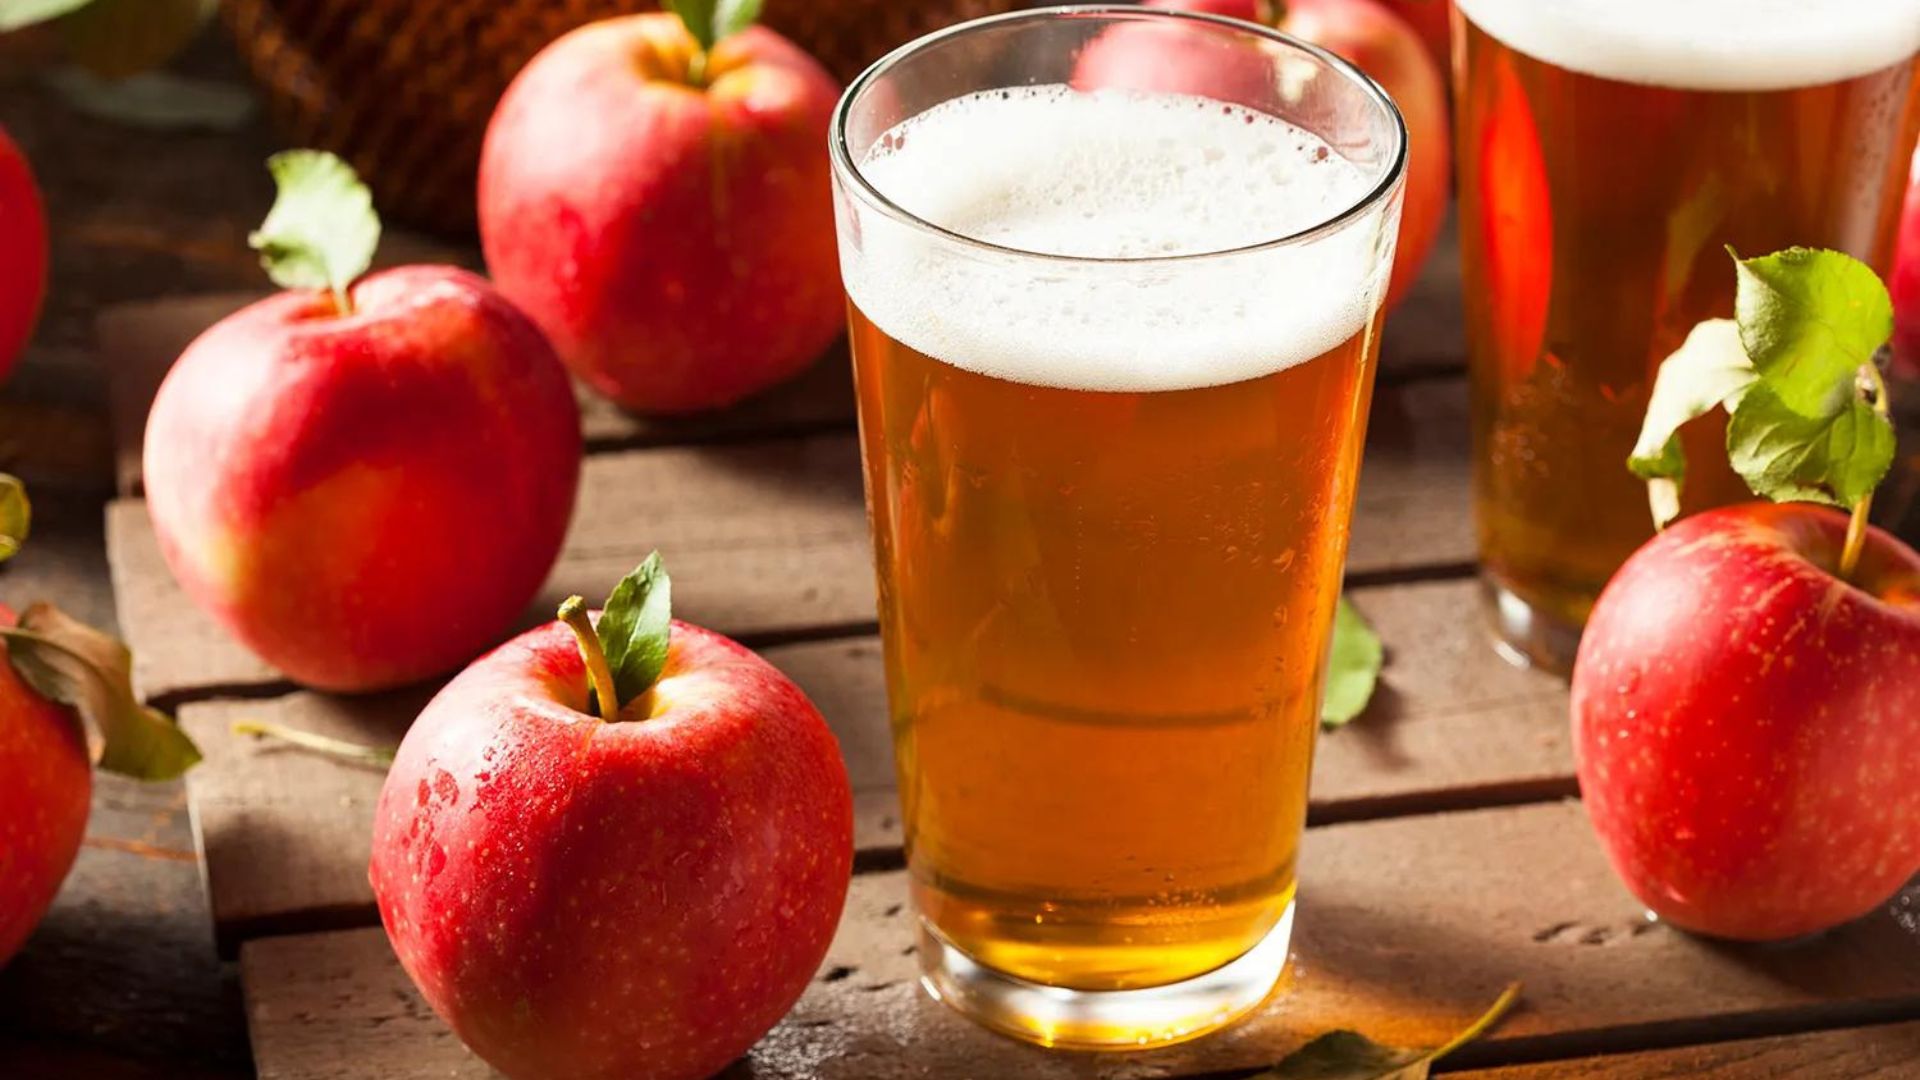 this image shows Hard cider